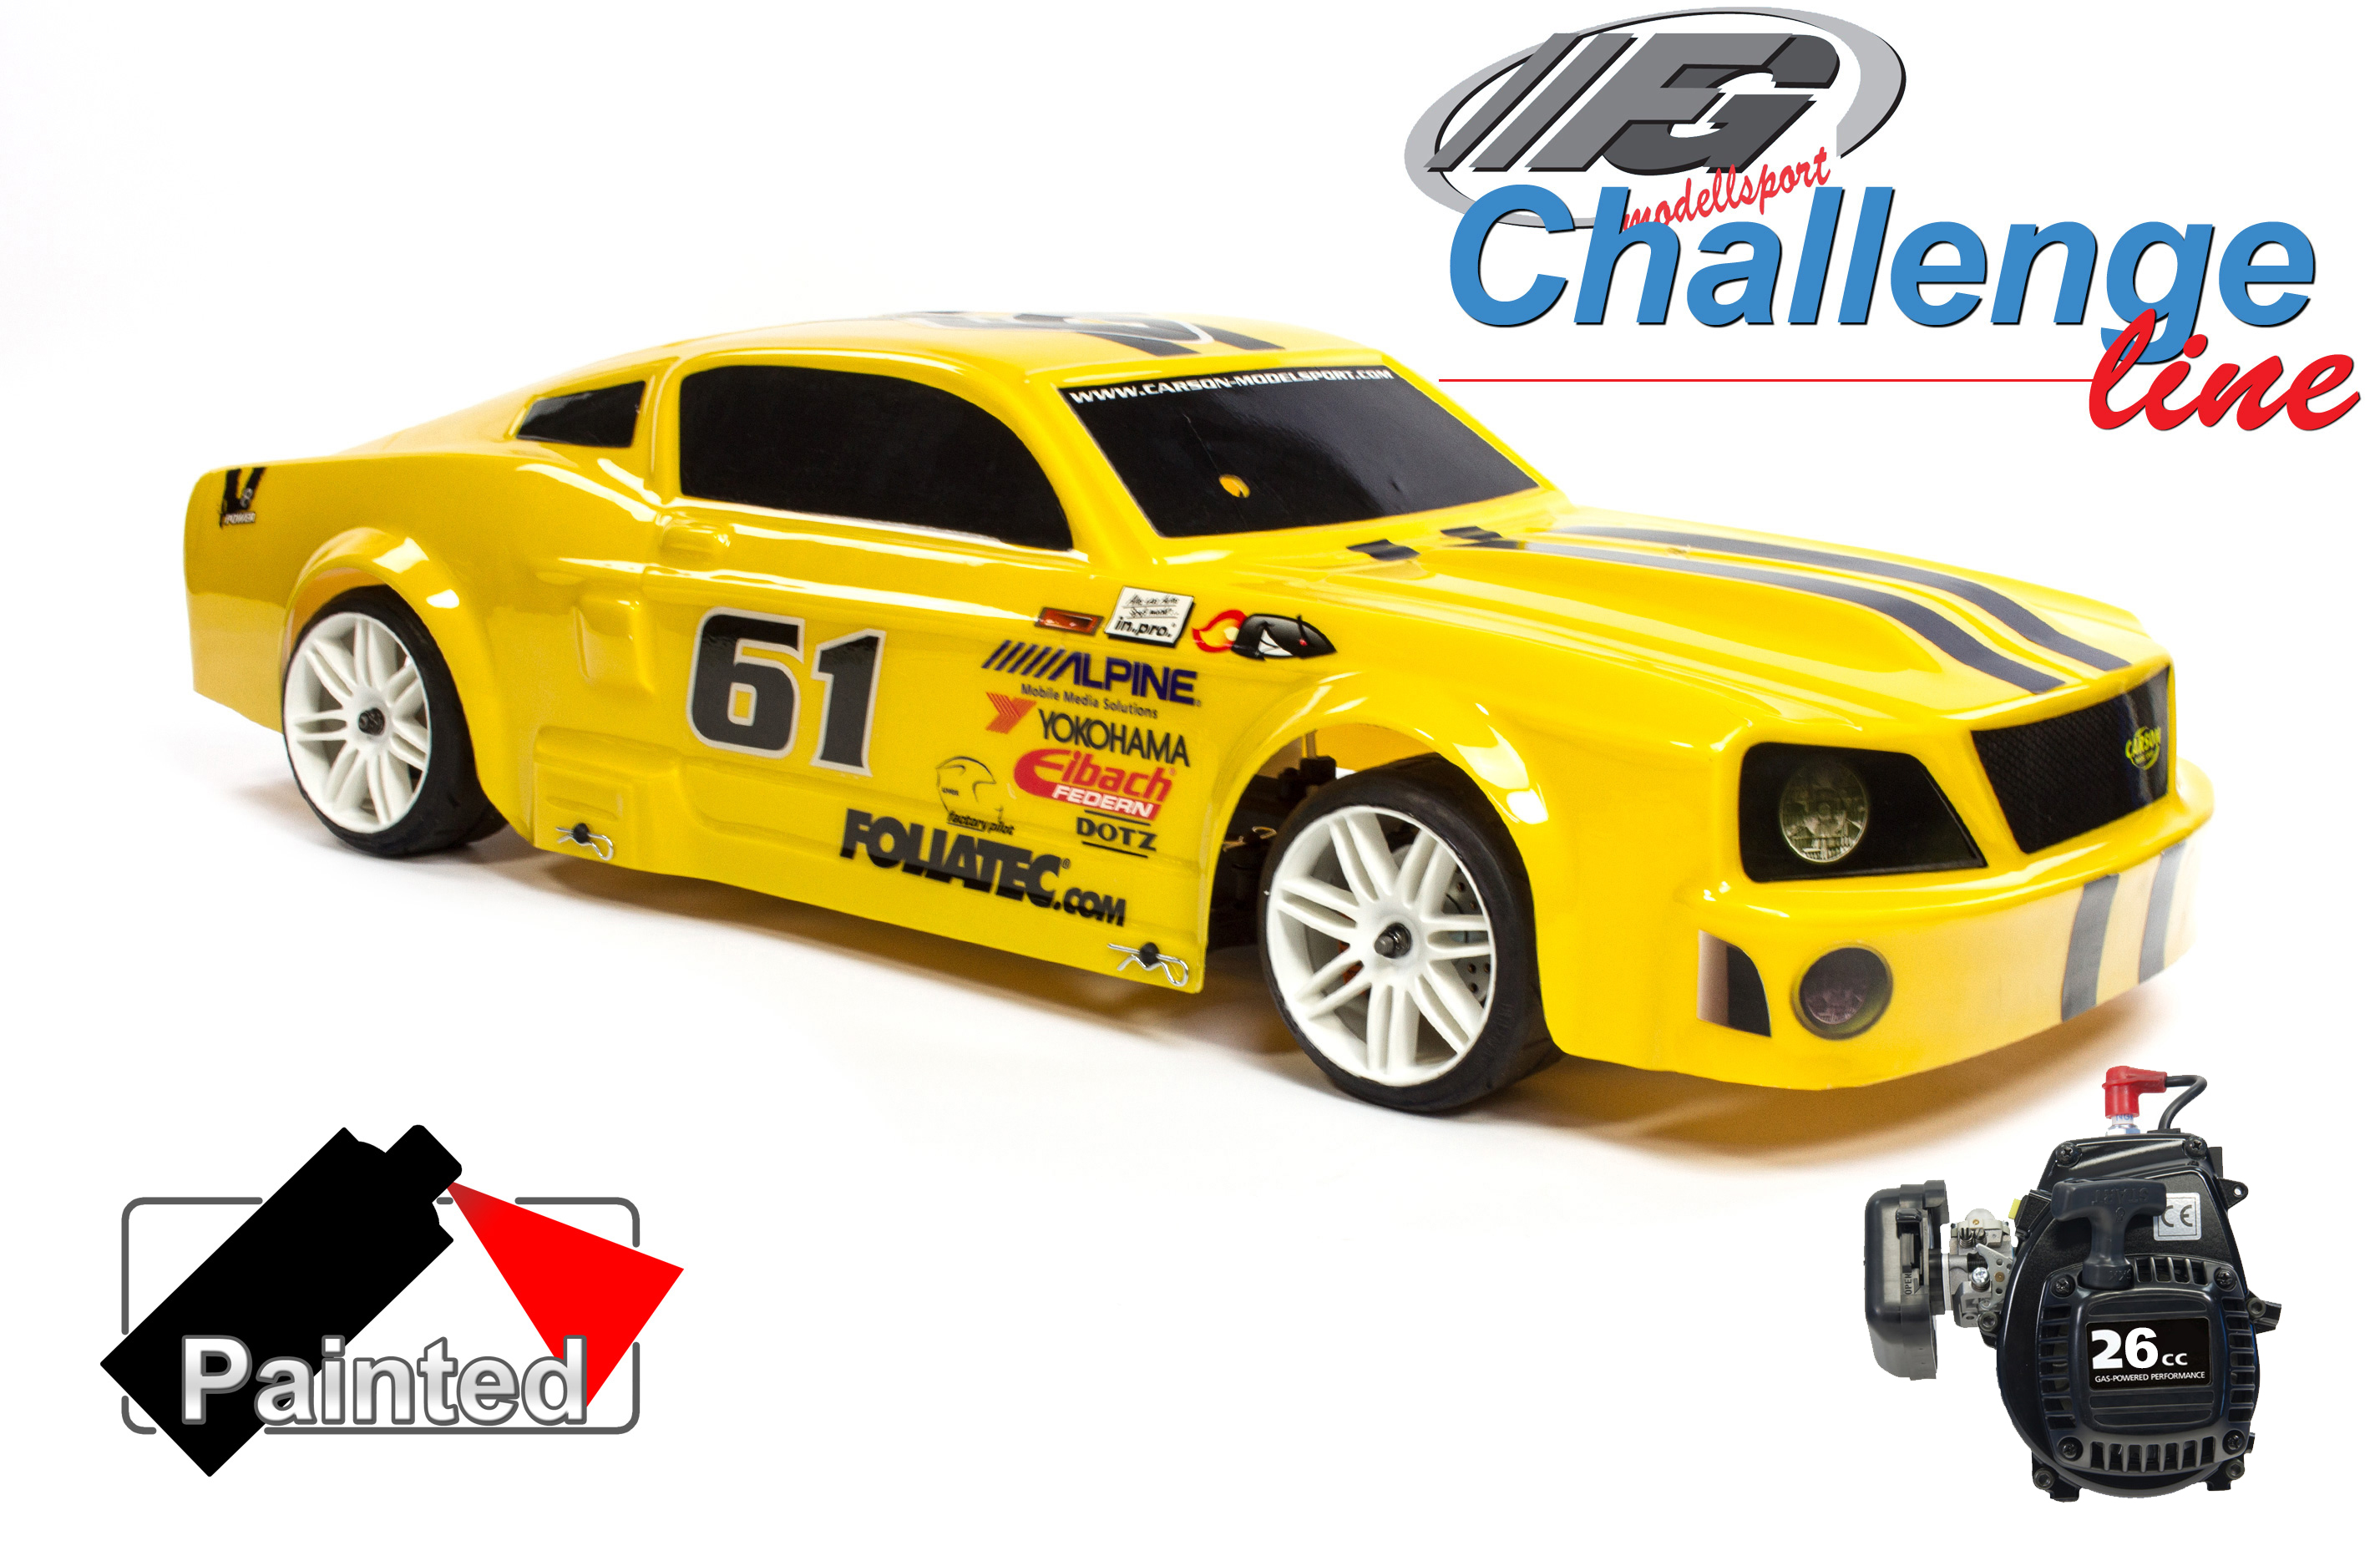 FG Challenge Line 530 painted Ford Mustang with 26 cm³ FG engine